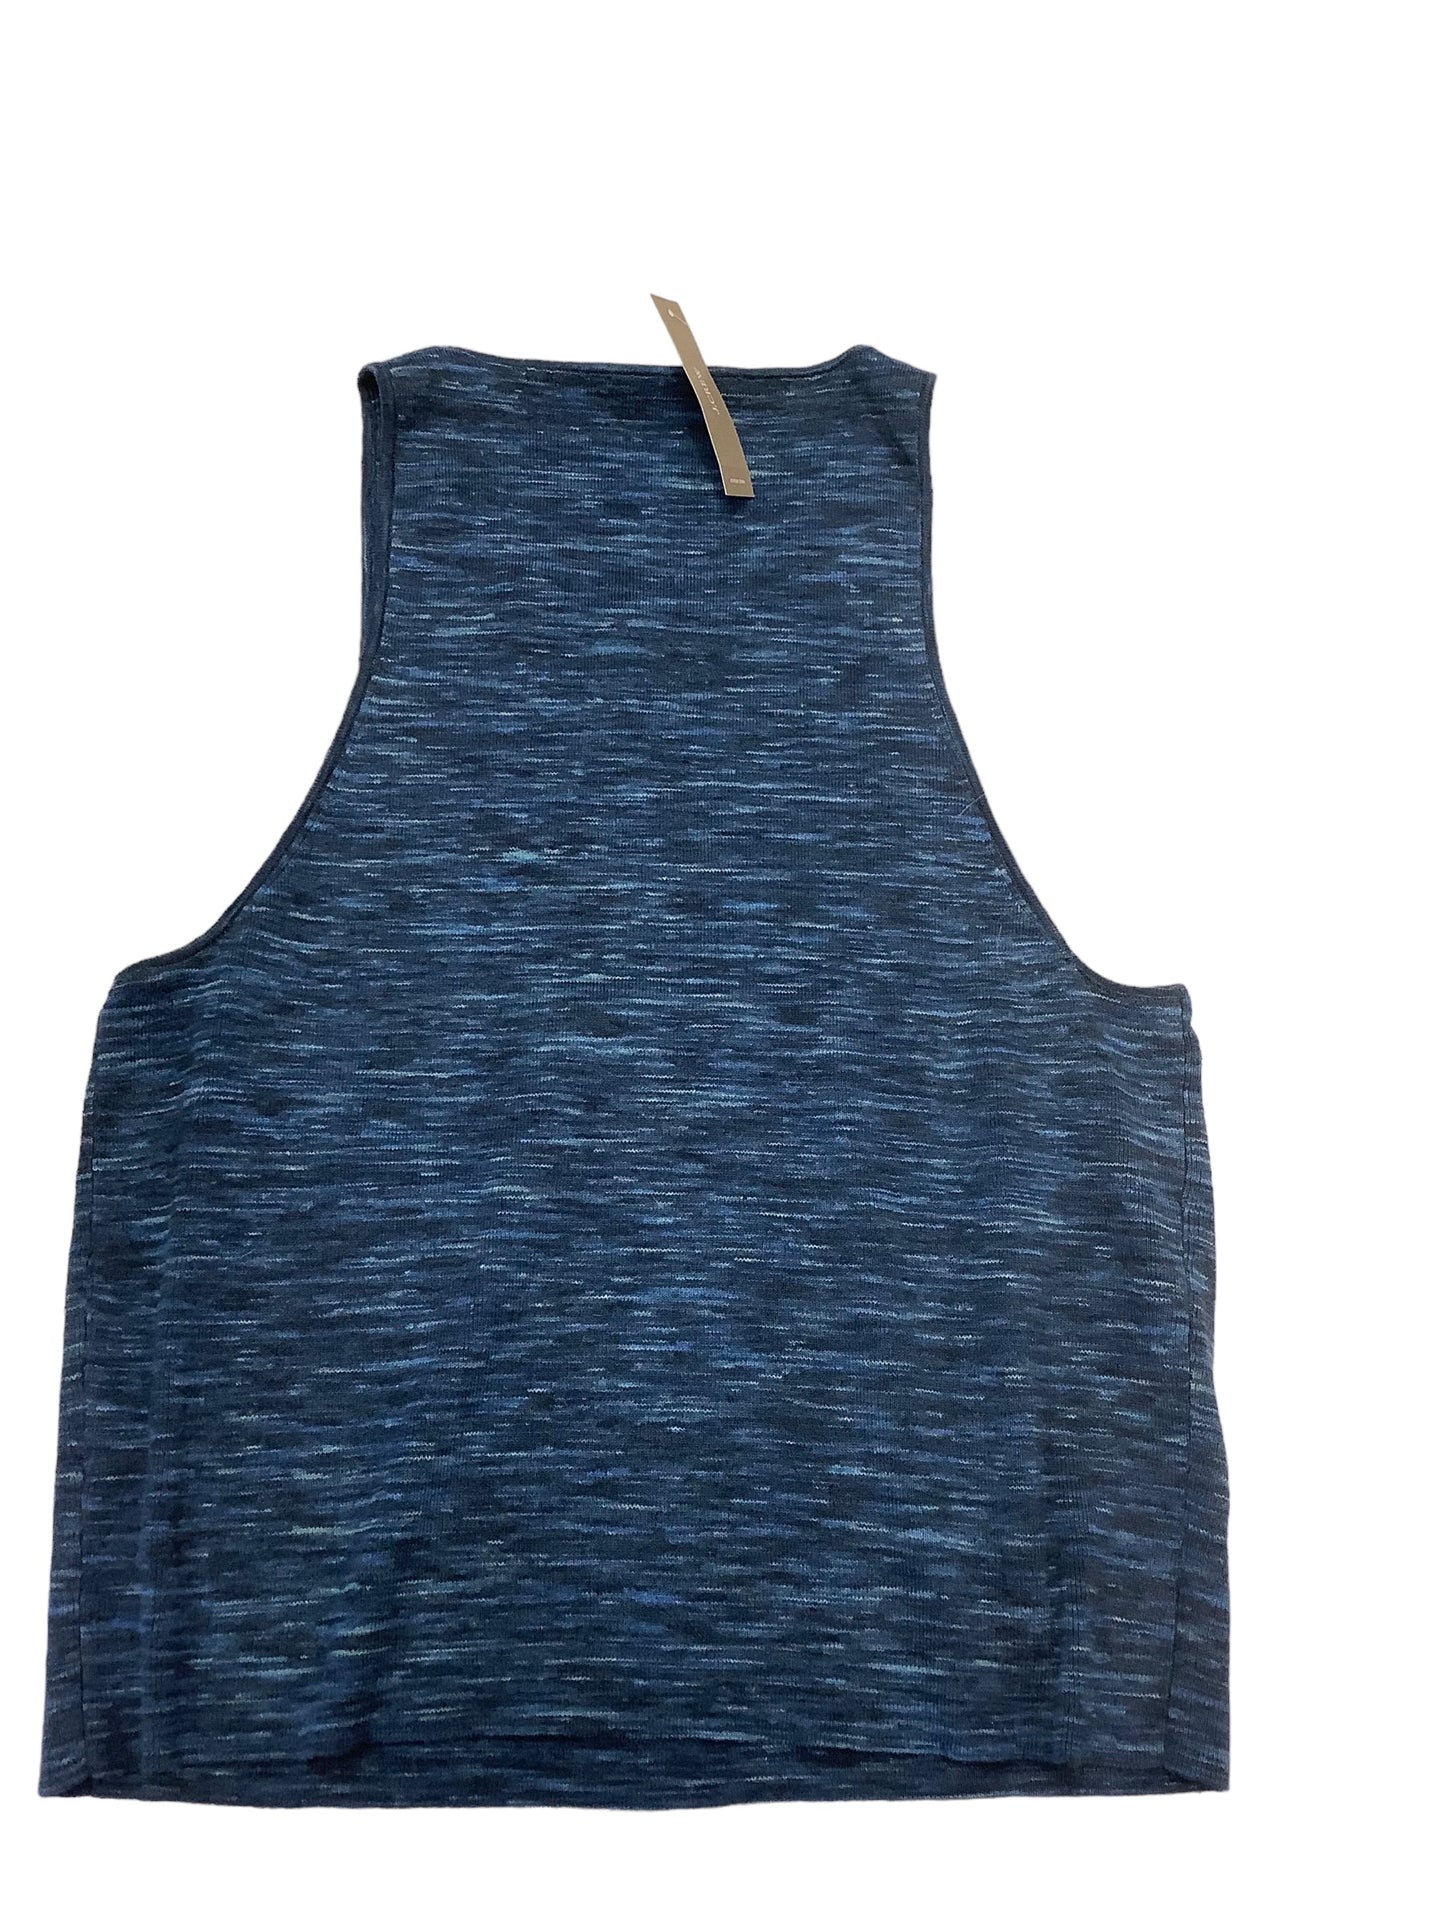 Athletic Tank Top By J Crew  Size: 2x